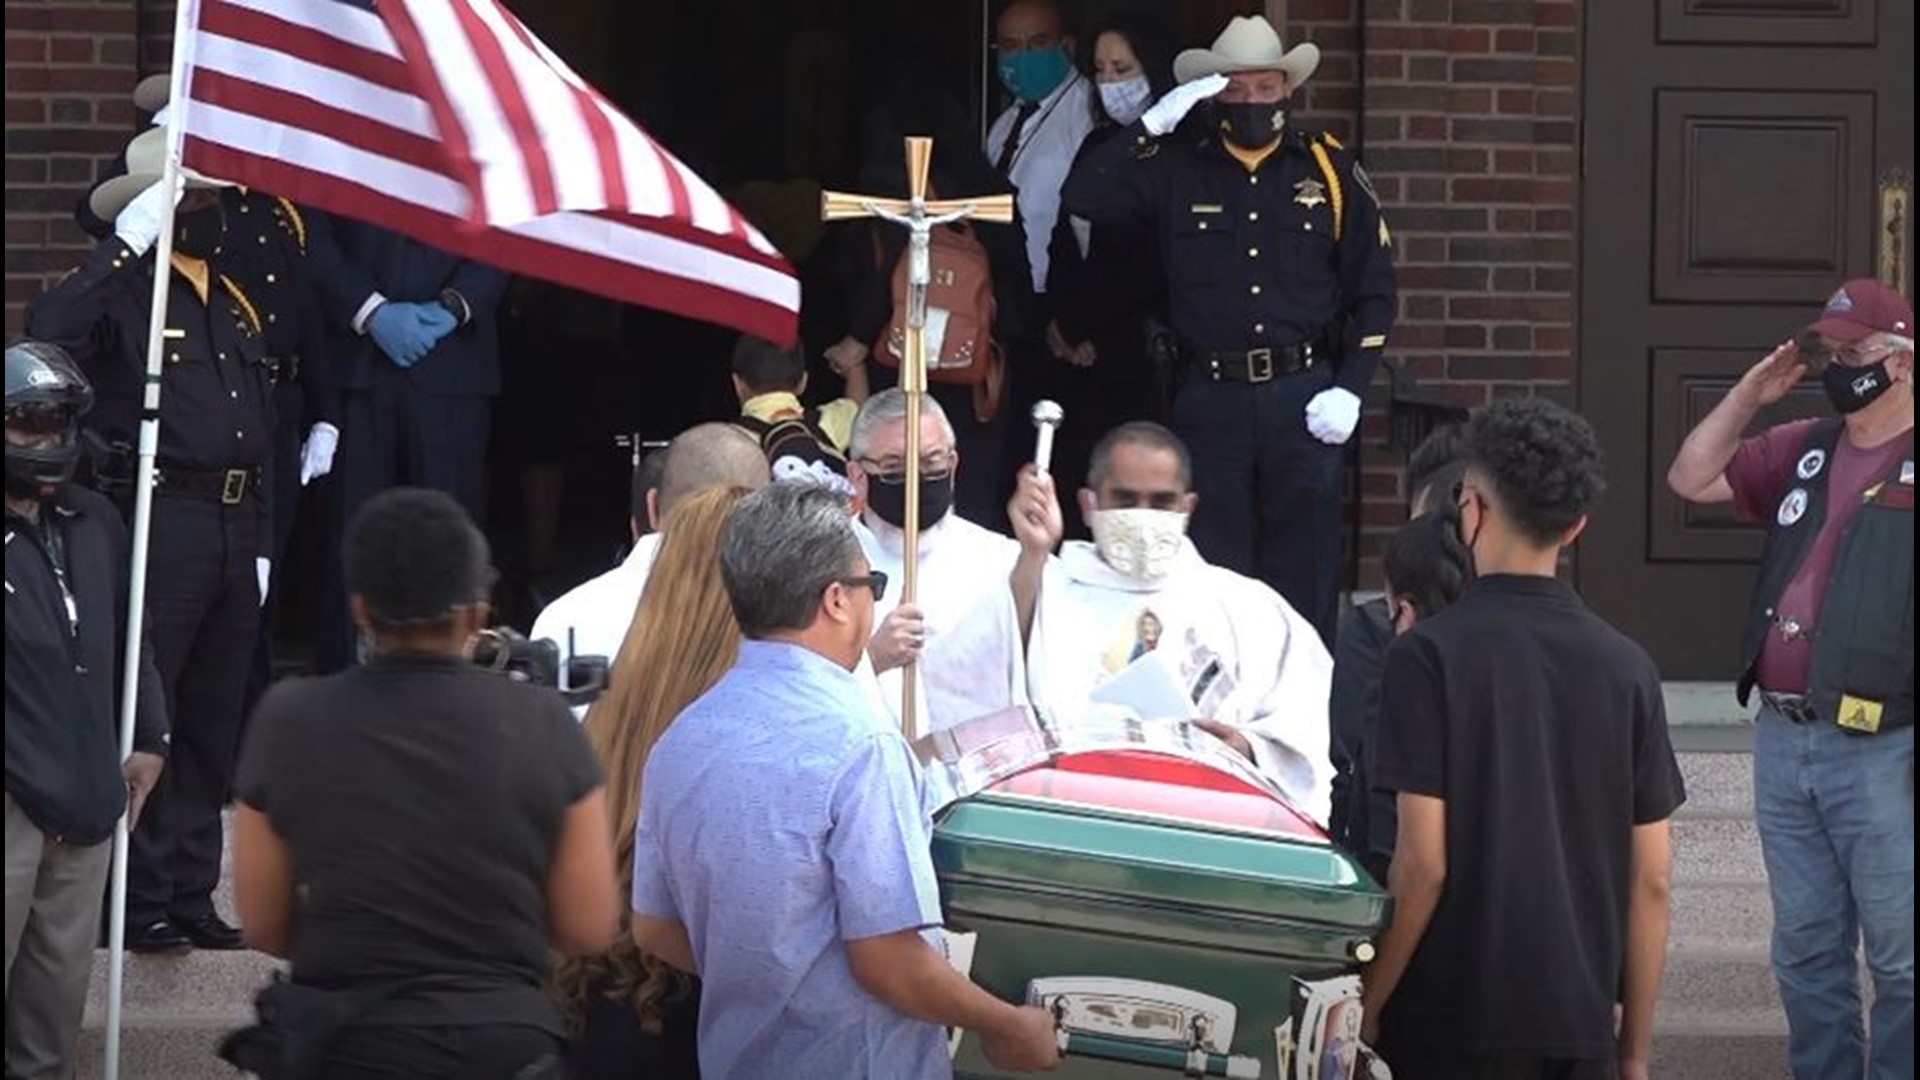 Family members were joined by Houston and state leaders at the private funeral held at Holy Name Catholic Church in Houston Friday morning.